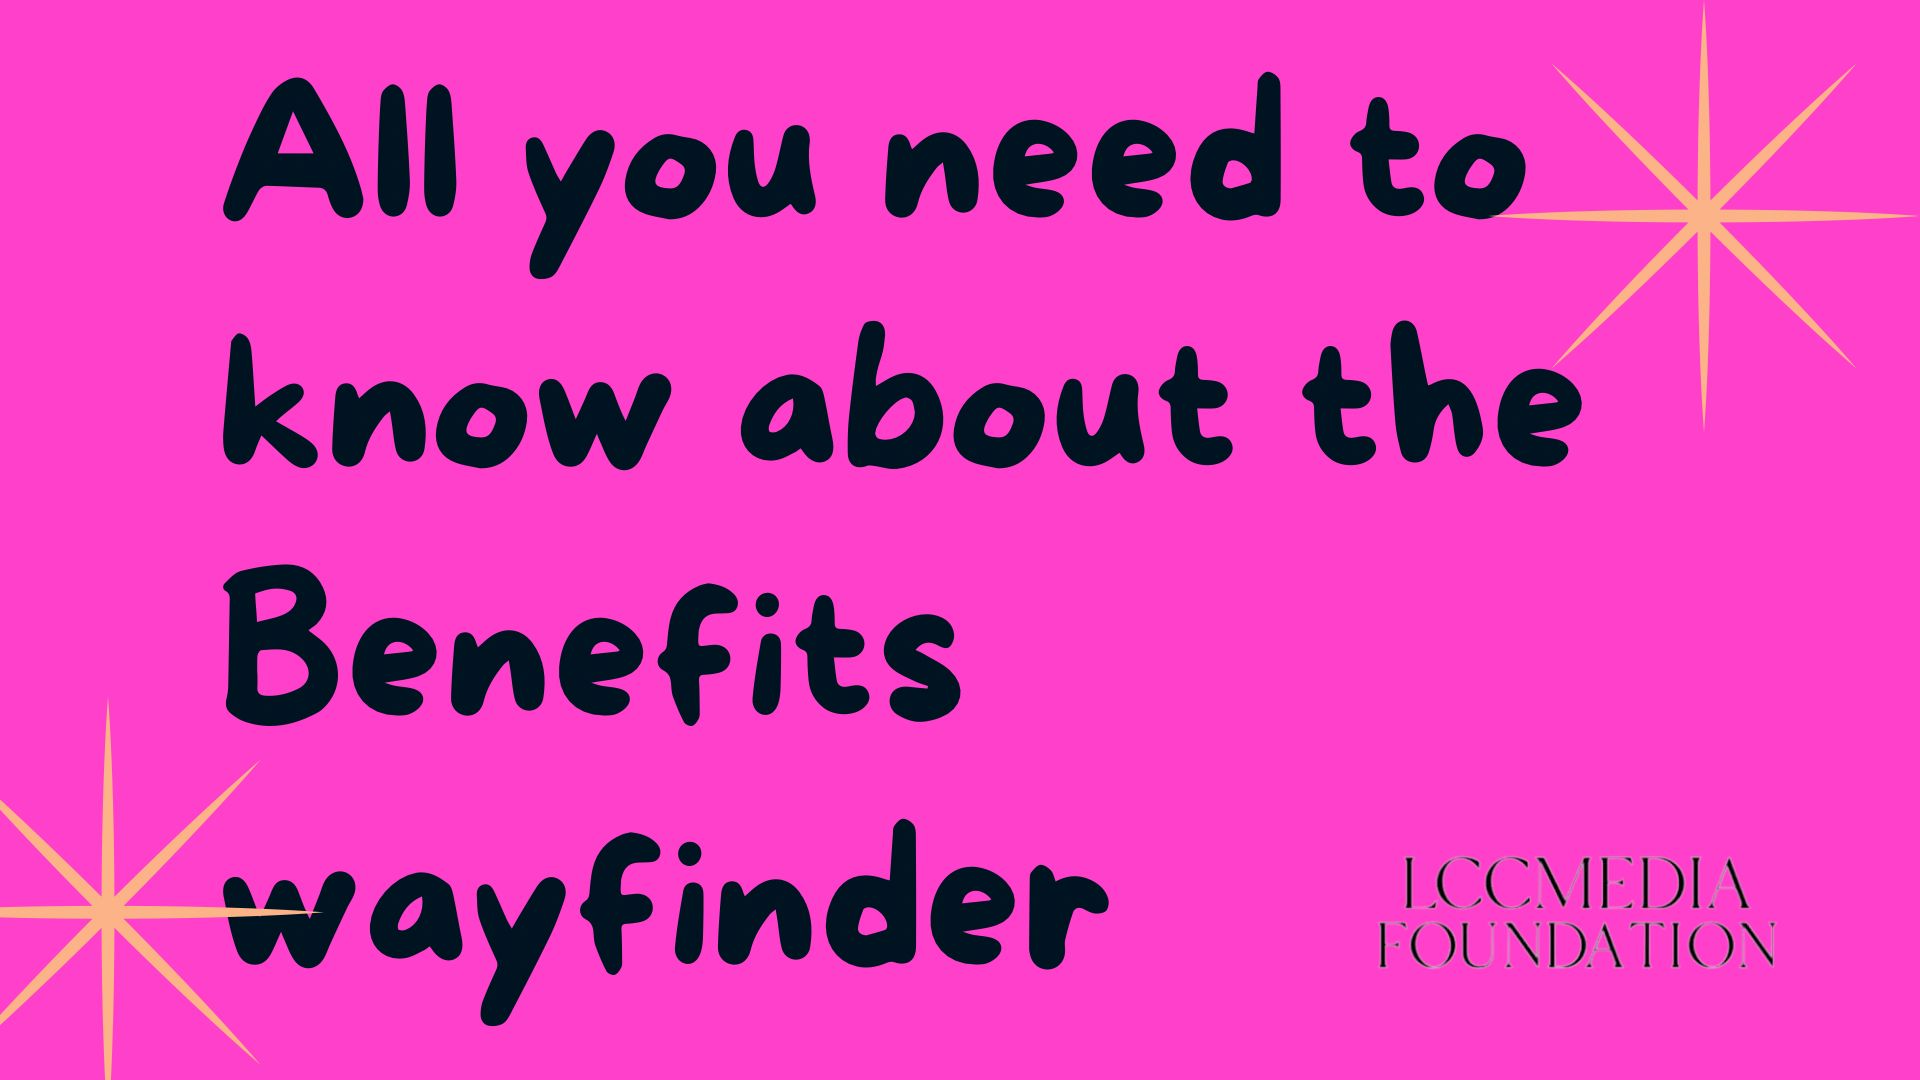 All you need to know about the Benefits Wayfinder